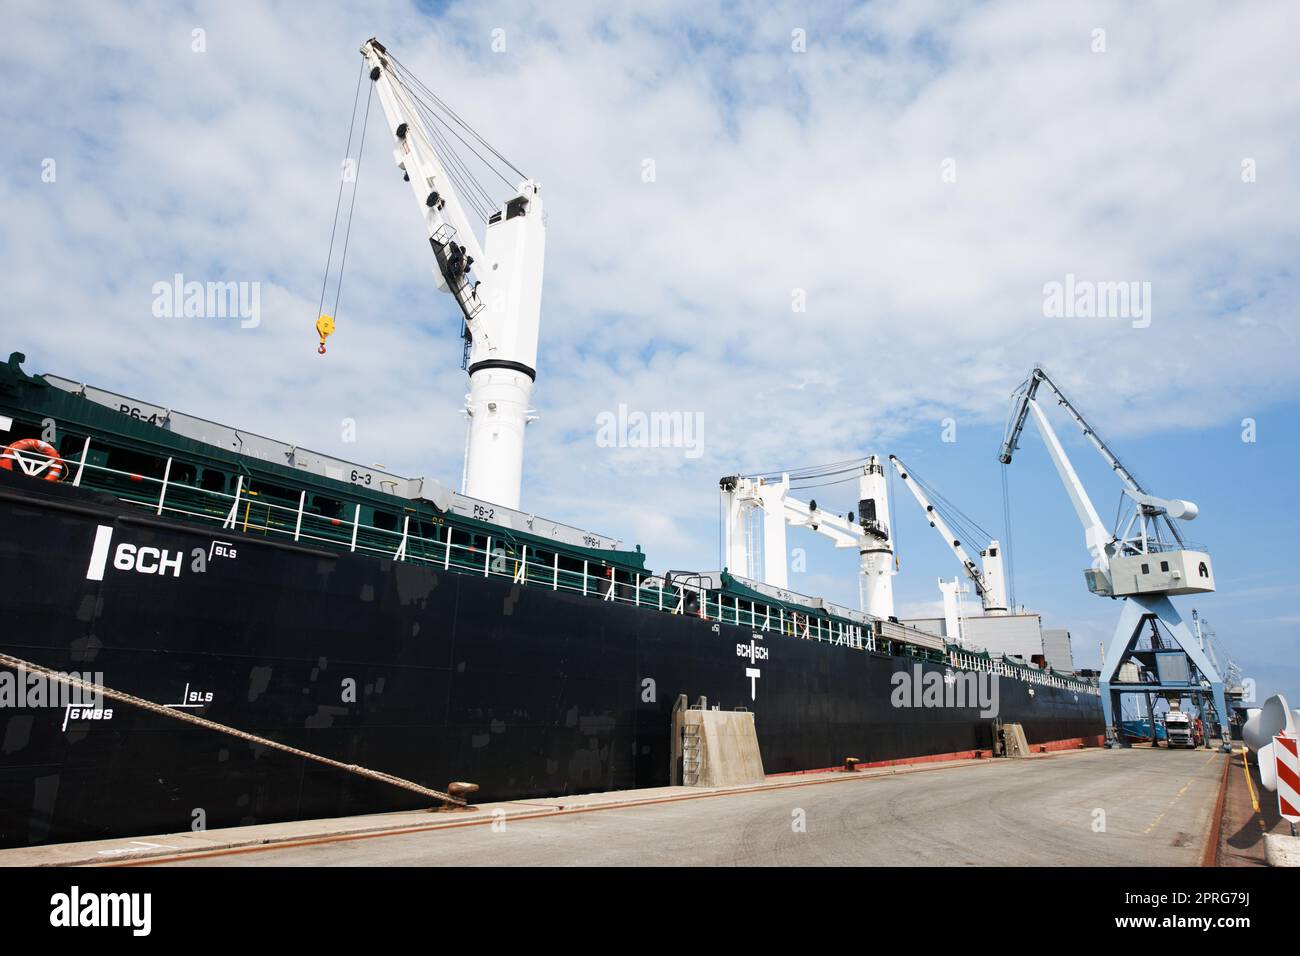 Shipping, logistics and supply chain with a ship in a harbor for freight and cargo delivery. Shipment, courier and service with a commercial and industrial vessel in the export and transport industry Stock Photo